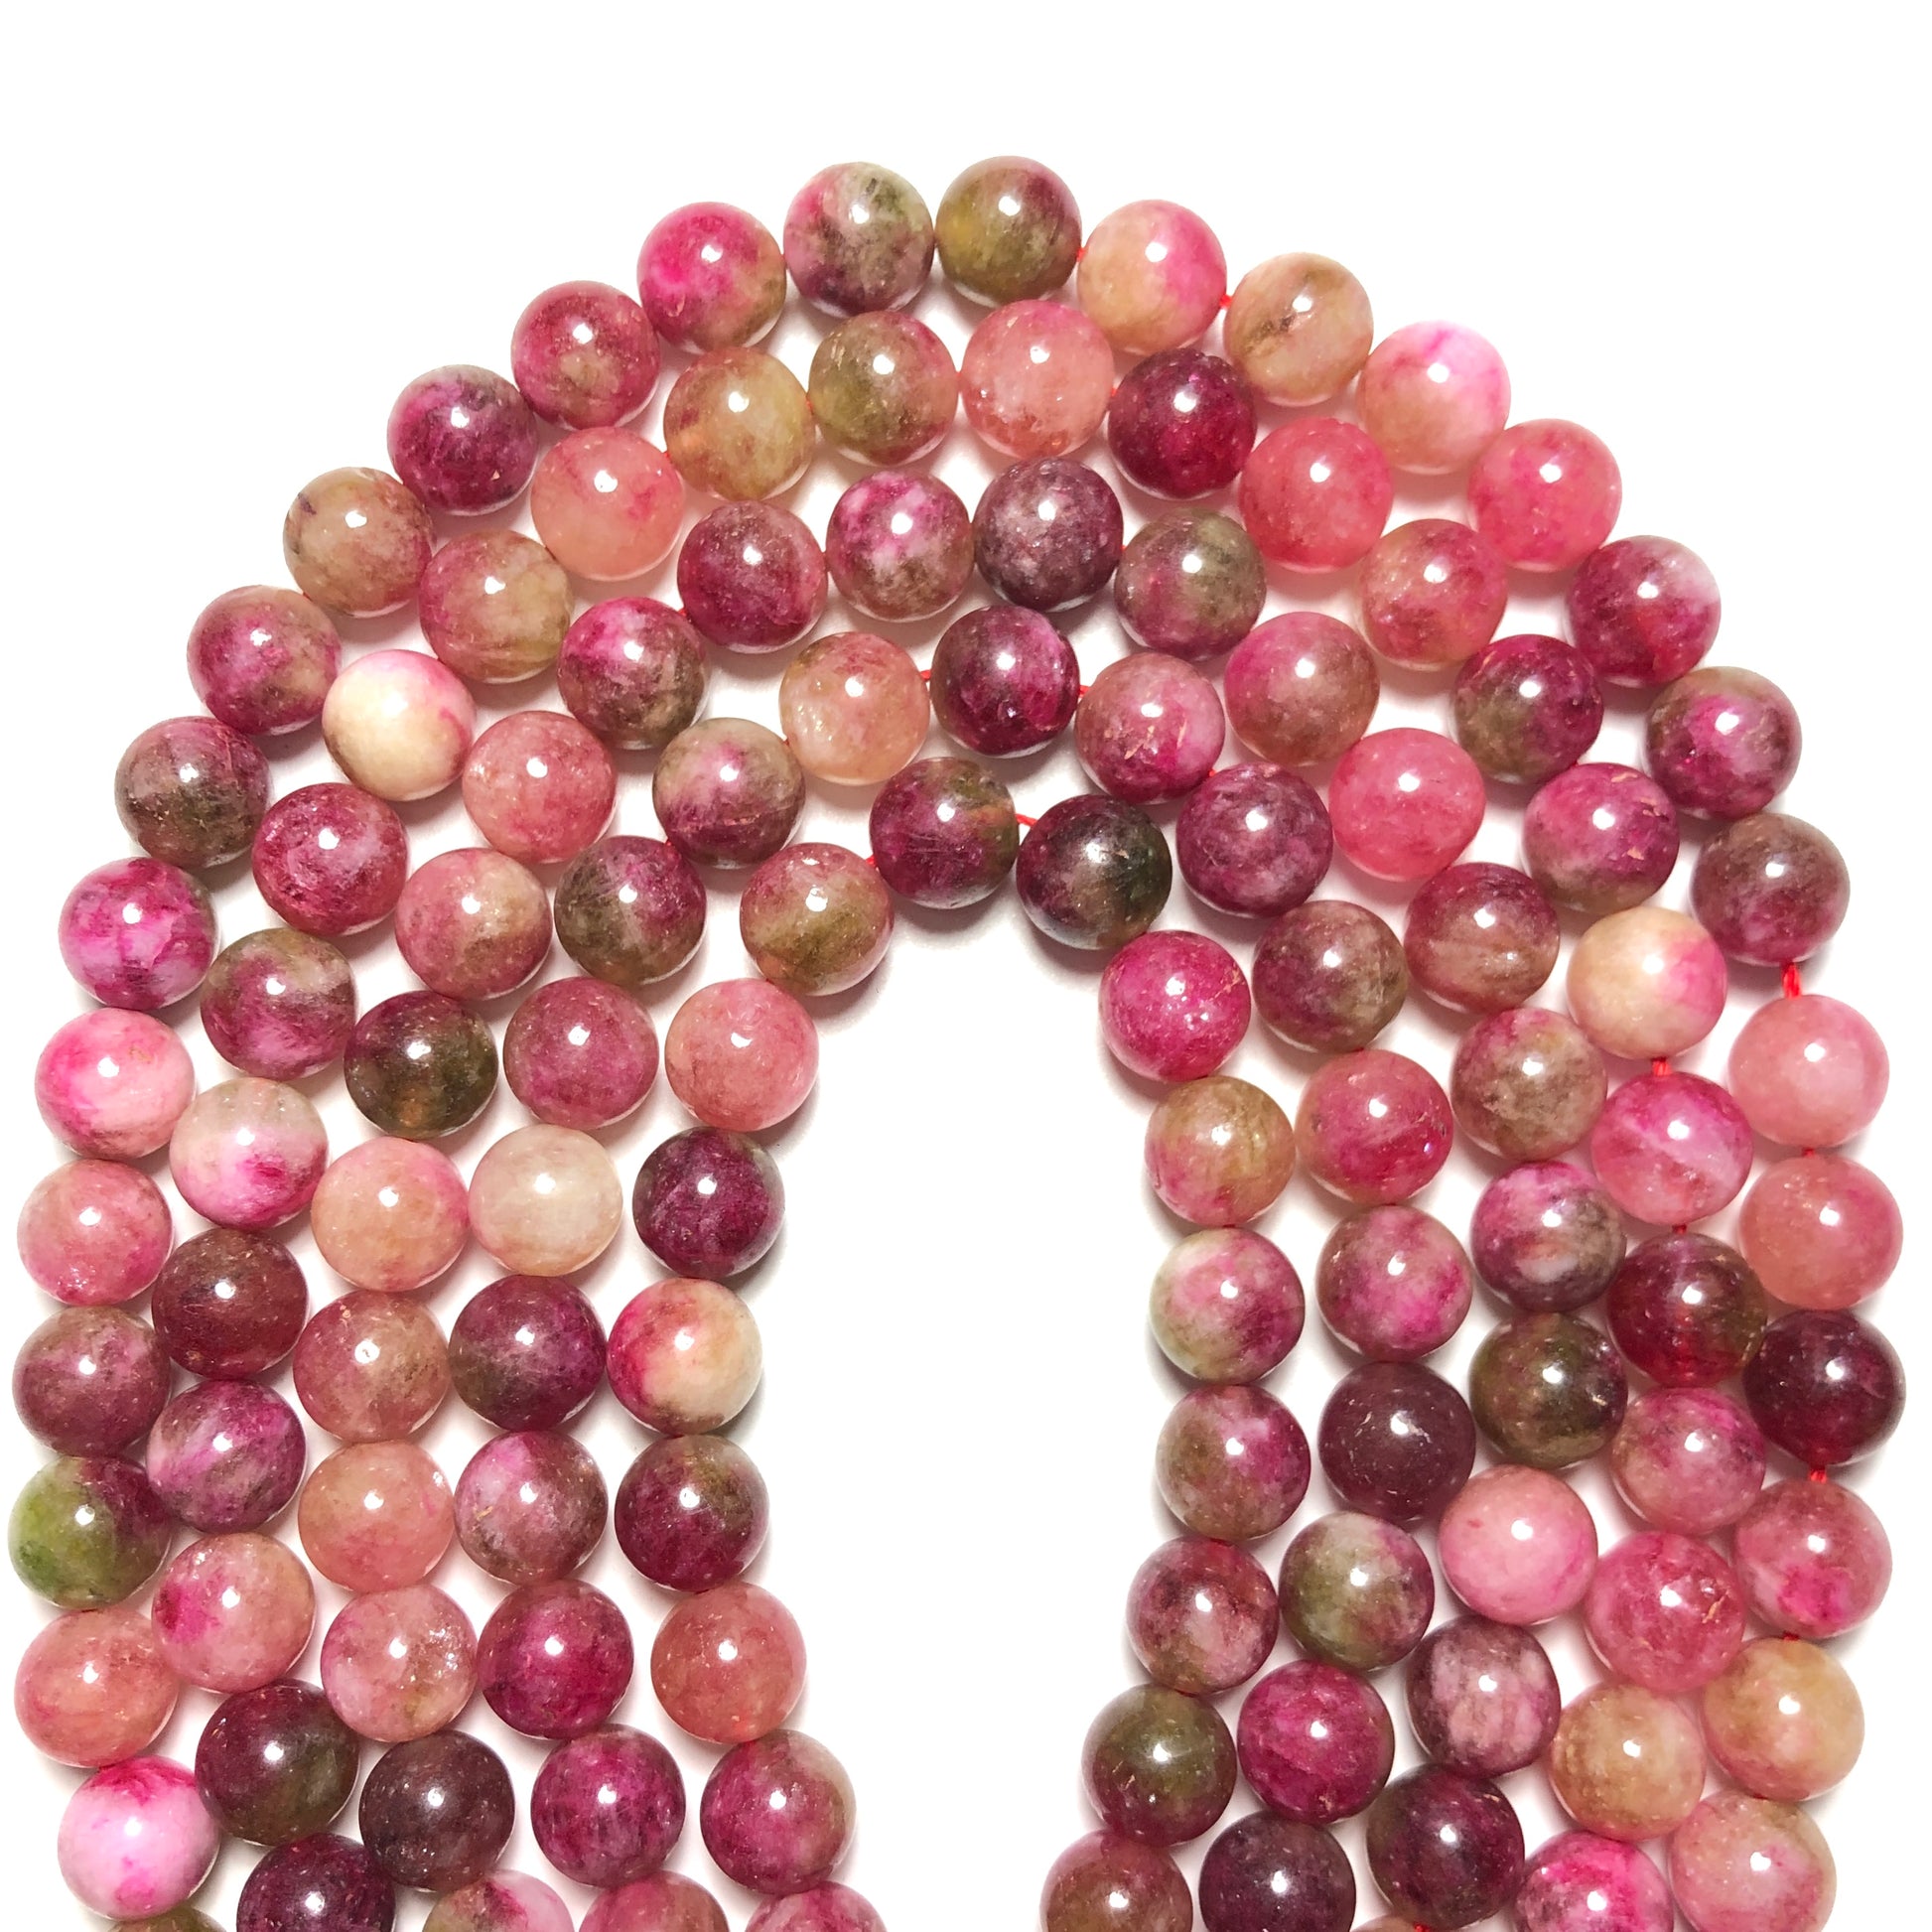 2 Strands/lot 10mm Multicolor Quartz Round Stone Beads Watermelon Tourmaline Stone Beads New Beads Arrivals Other Stone Beads Charms Beads Beyond